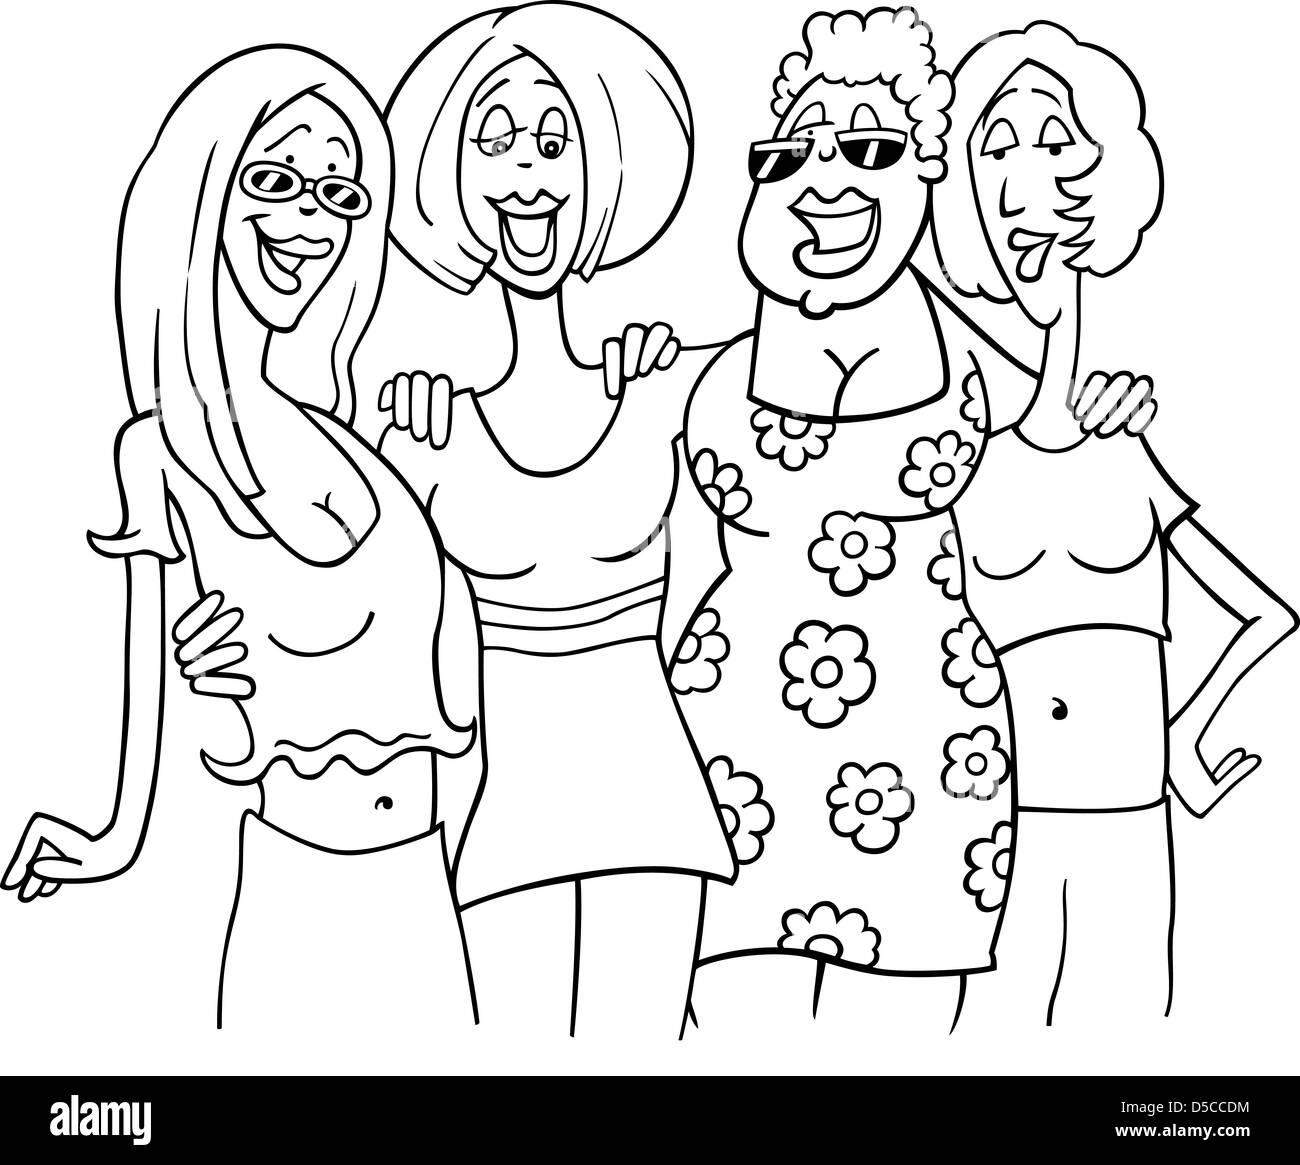 Black and White Cartoon Illustration of Four Women Friends Meeting Stock Photo